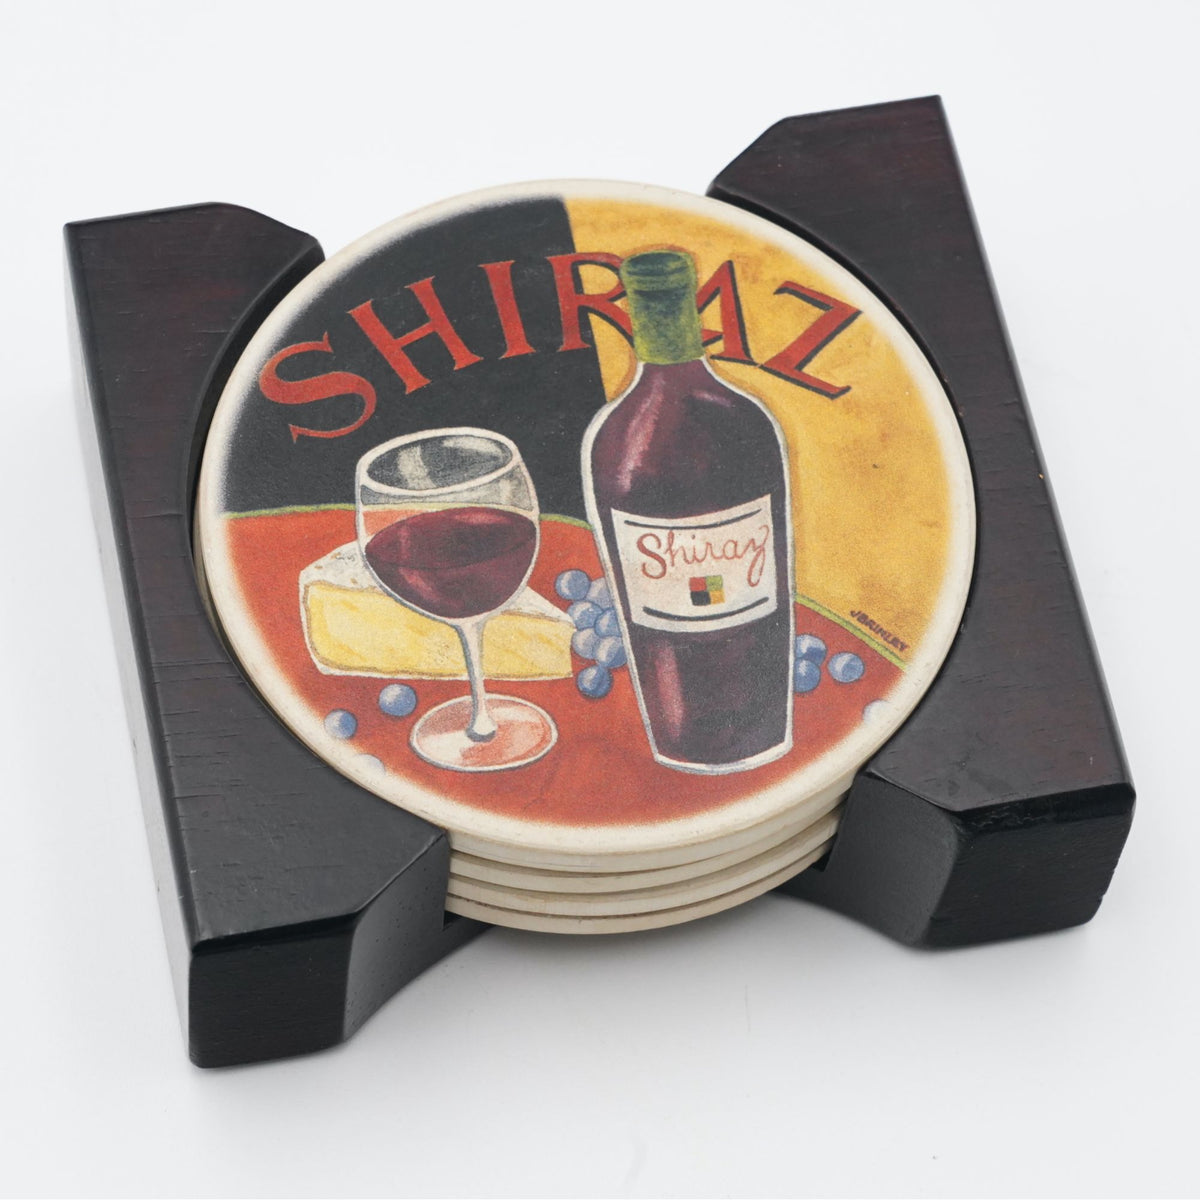 Absorbent Stone Coaster Set with Holder "The Wine Gallery" by Cypress Home